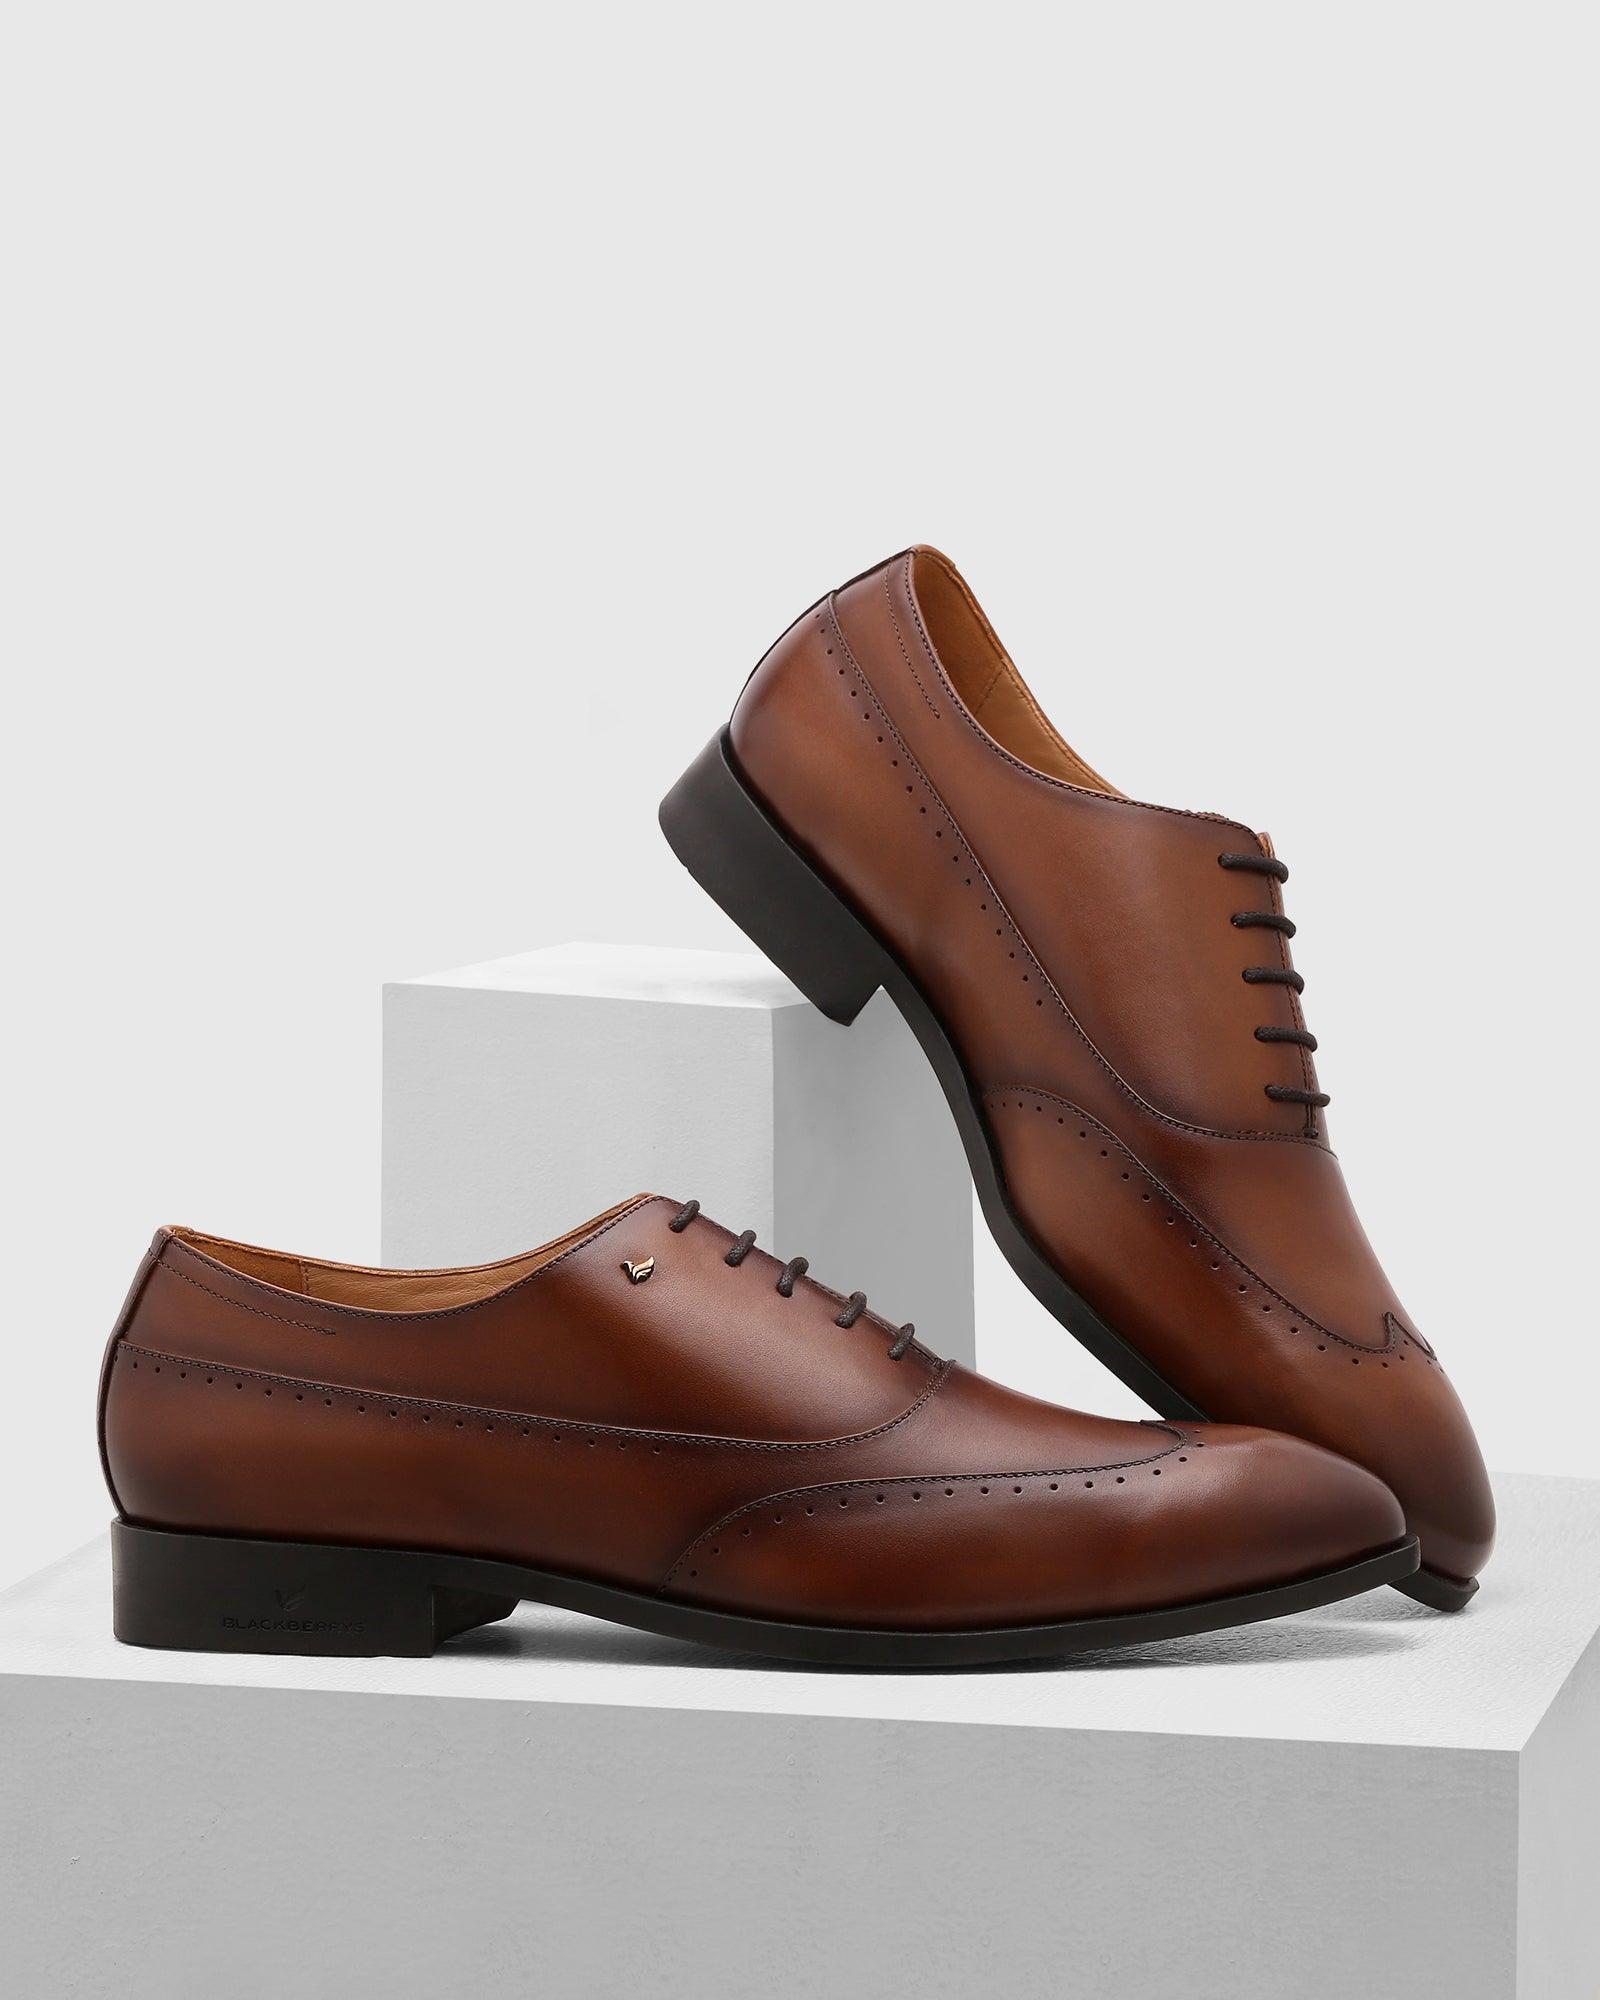 leather oxford shoes in tan (qusso)